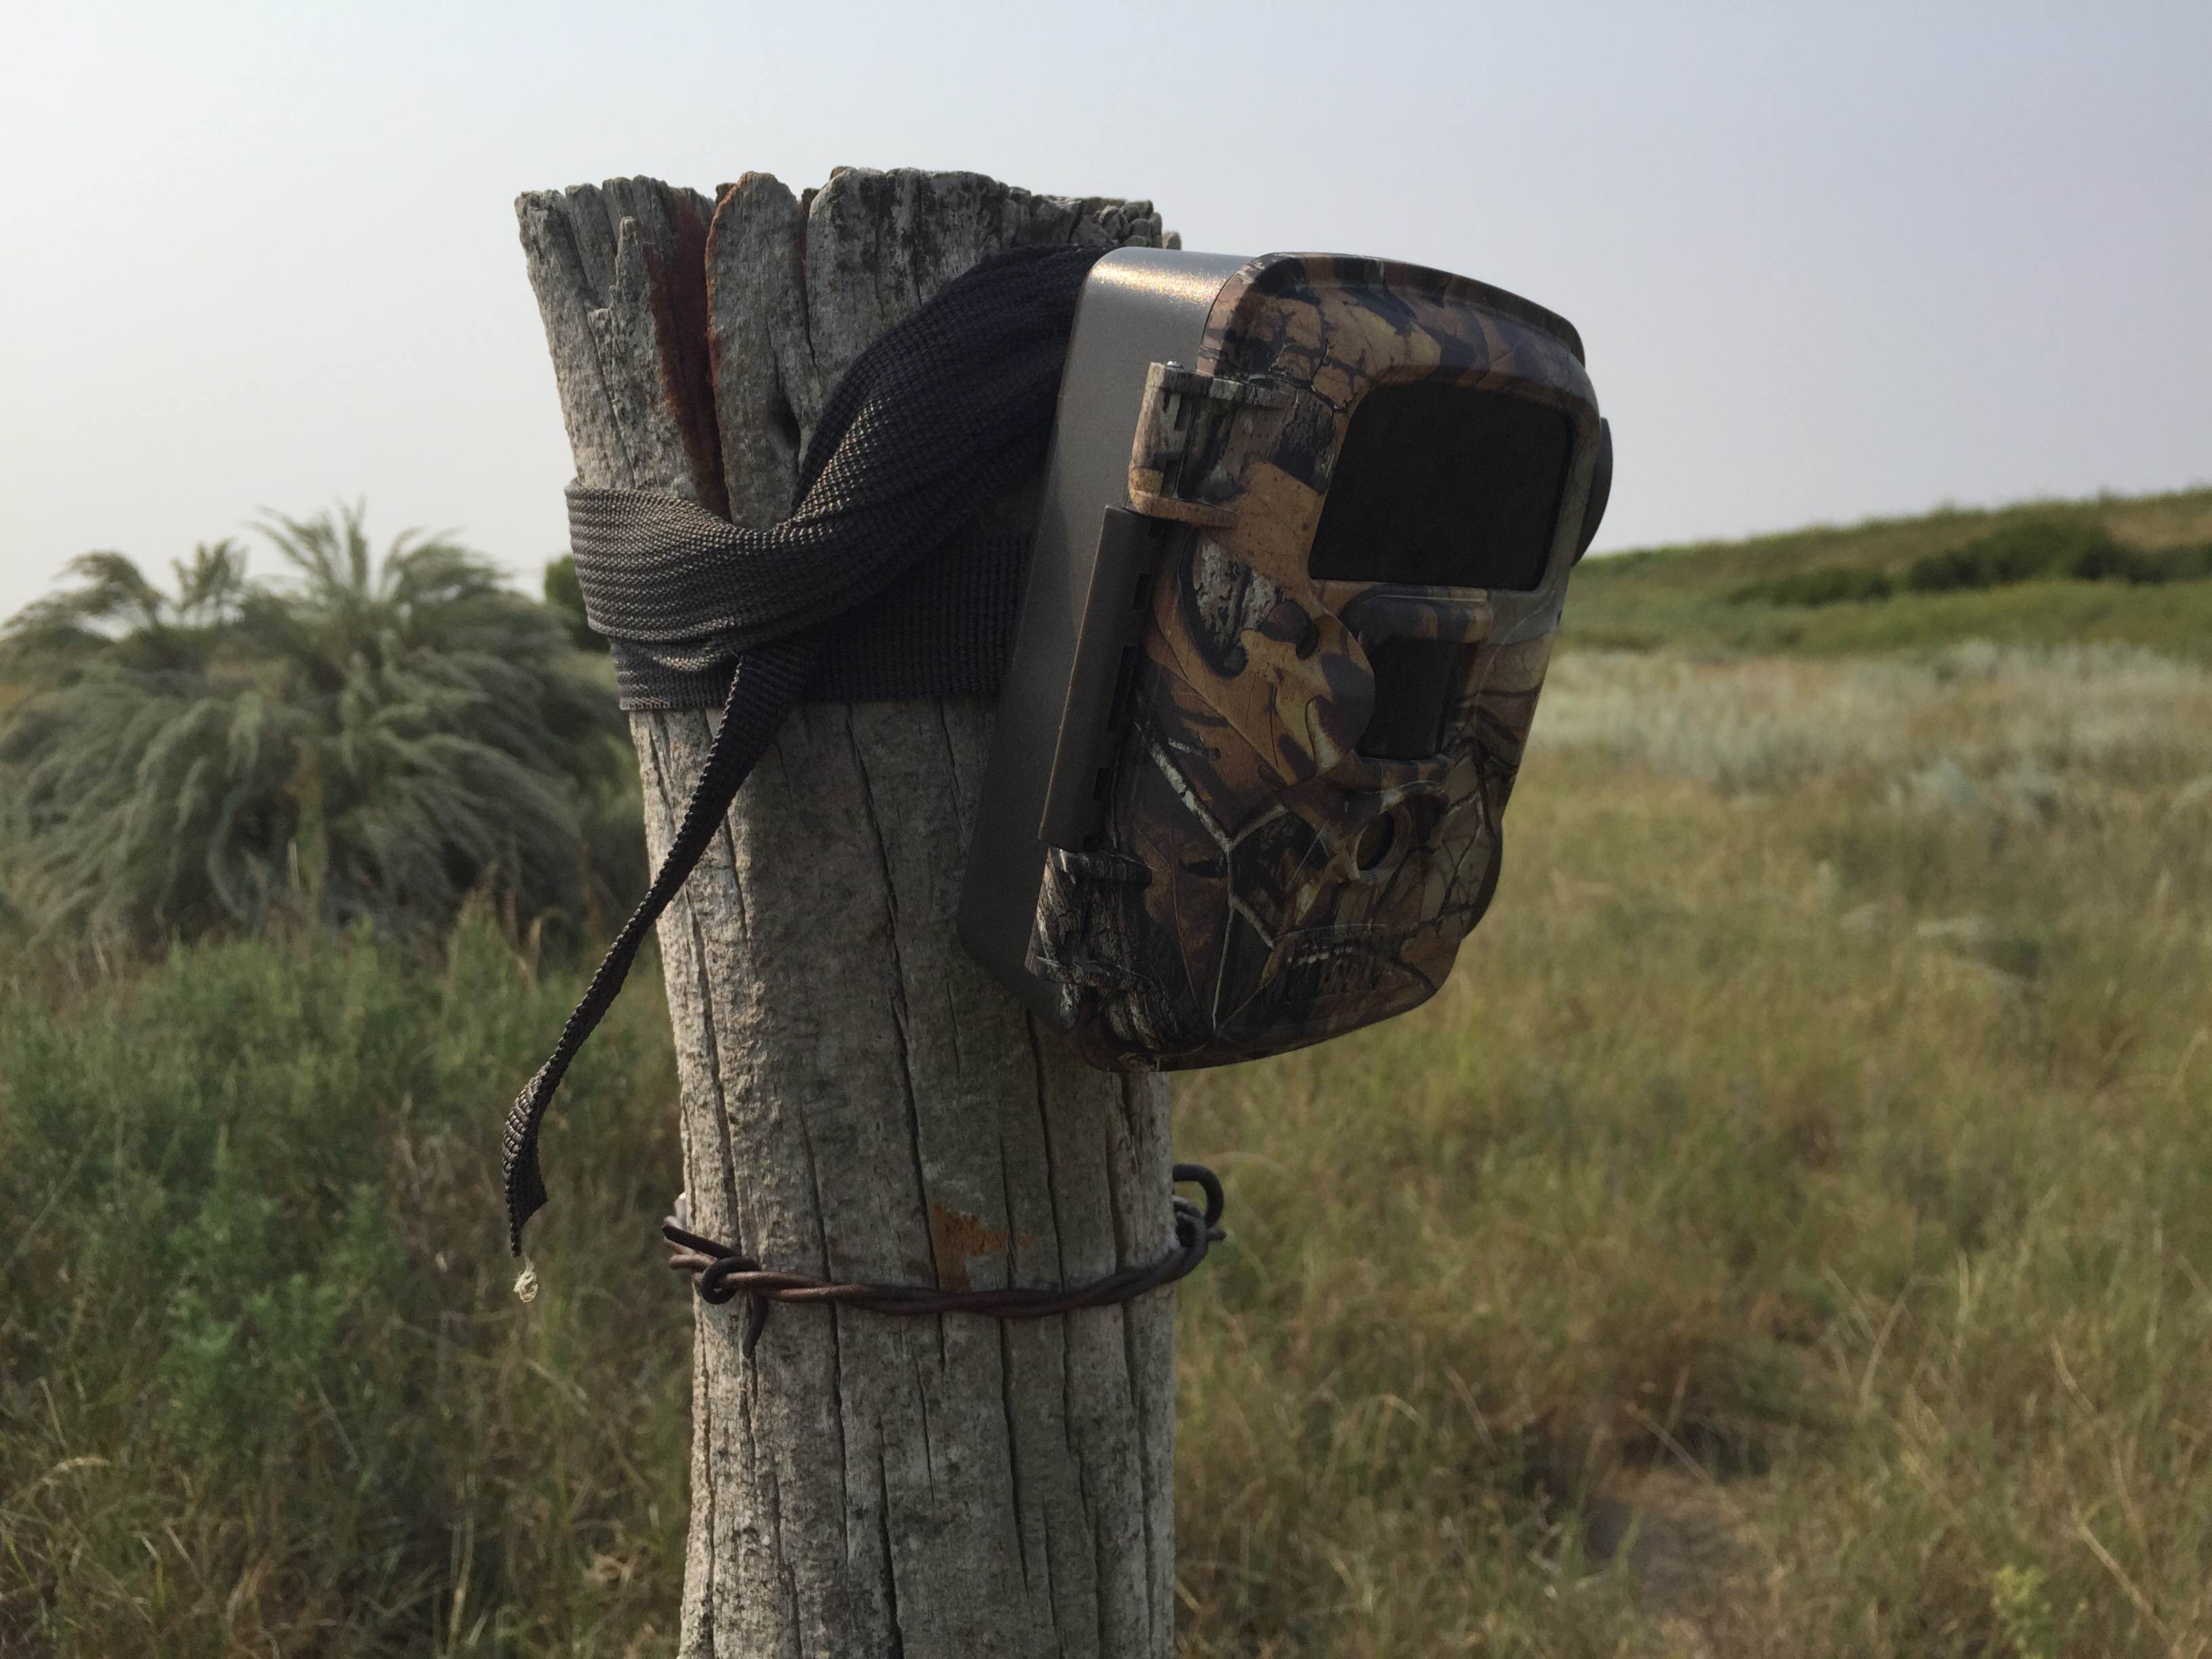 Trail Camera On Fence Post